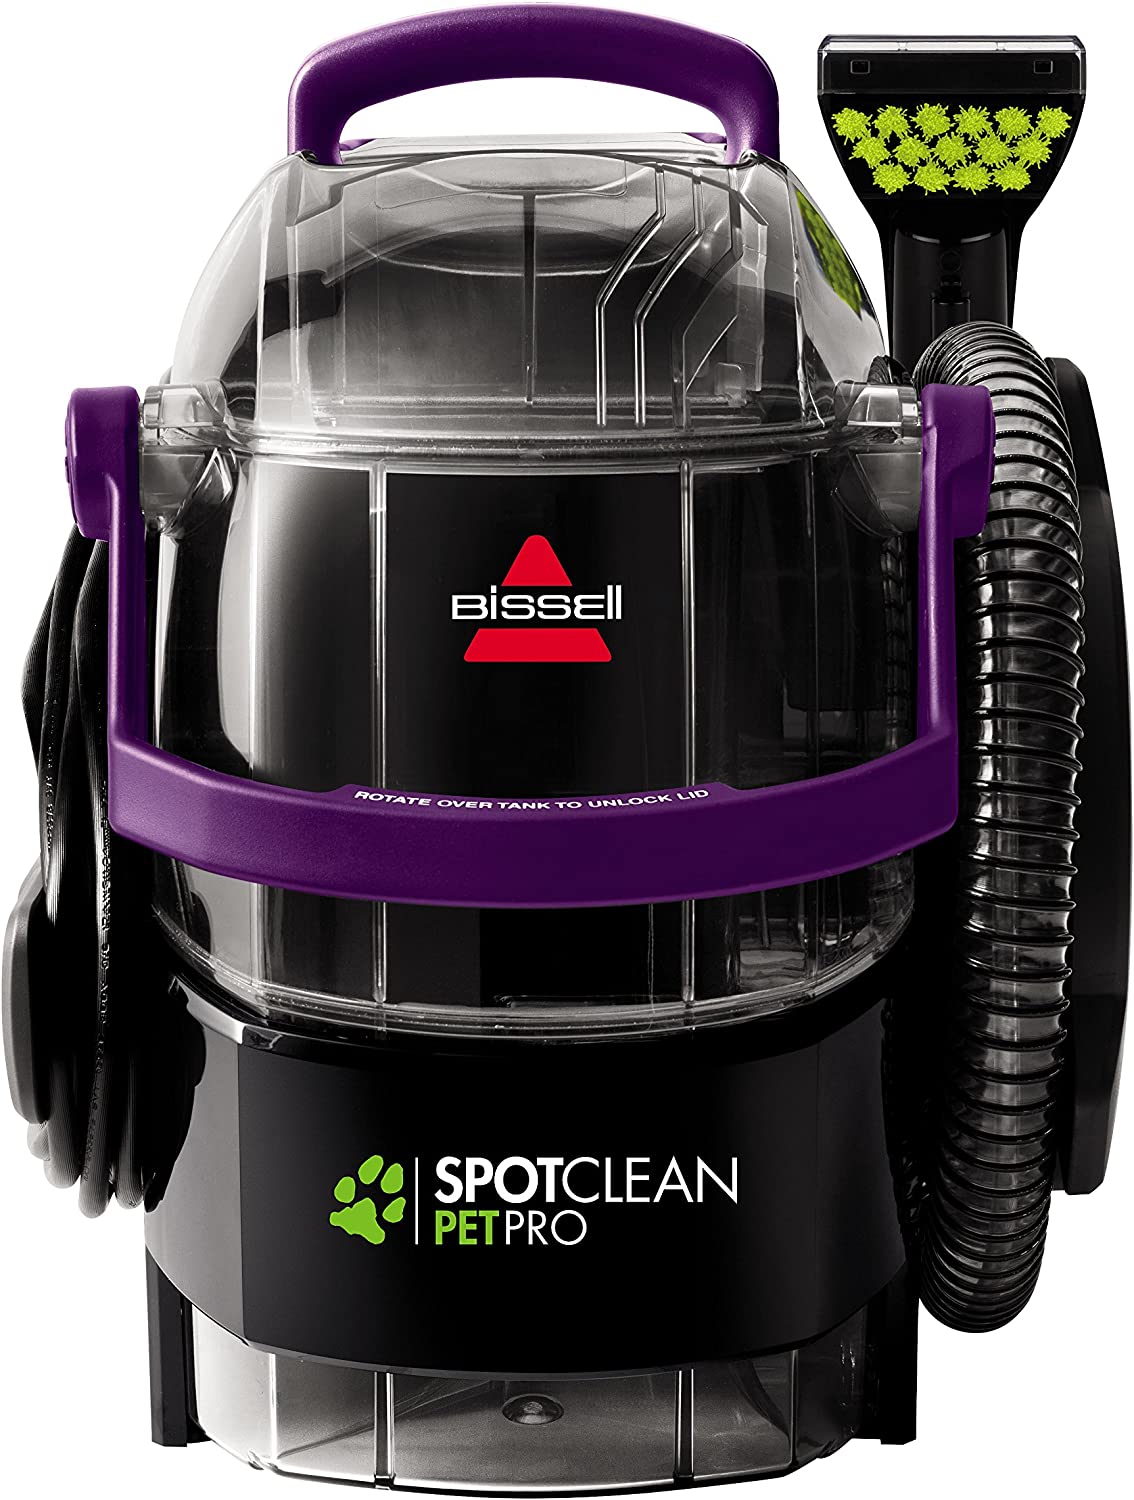 BISSELL SpotClean Pet Pro Portable Carpet Cleaner, [...]